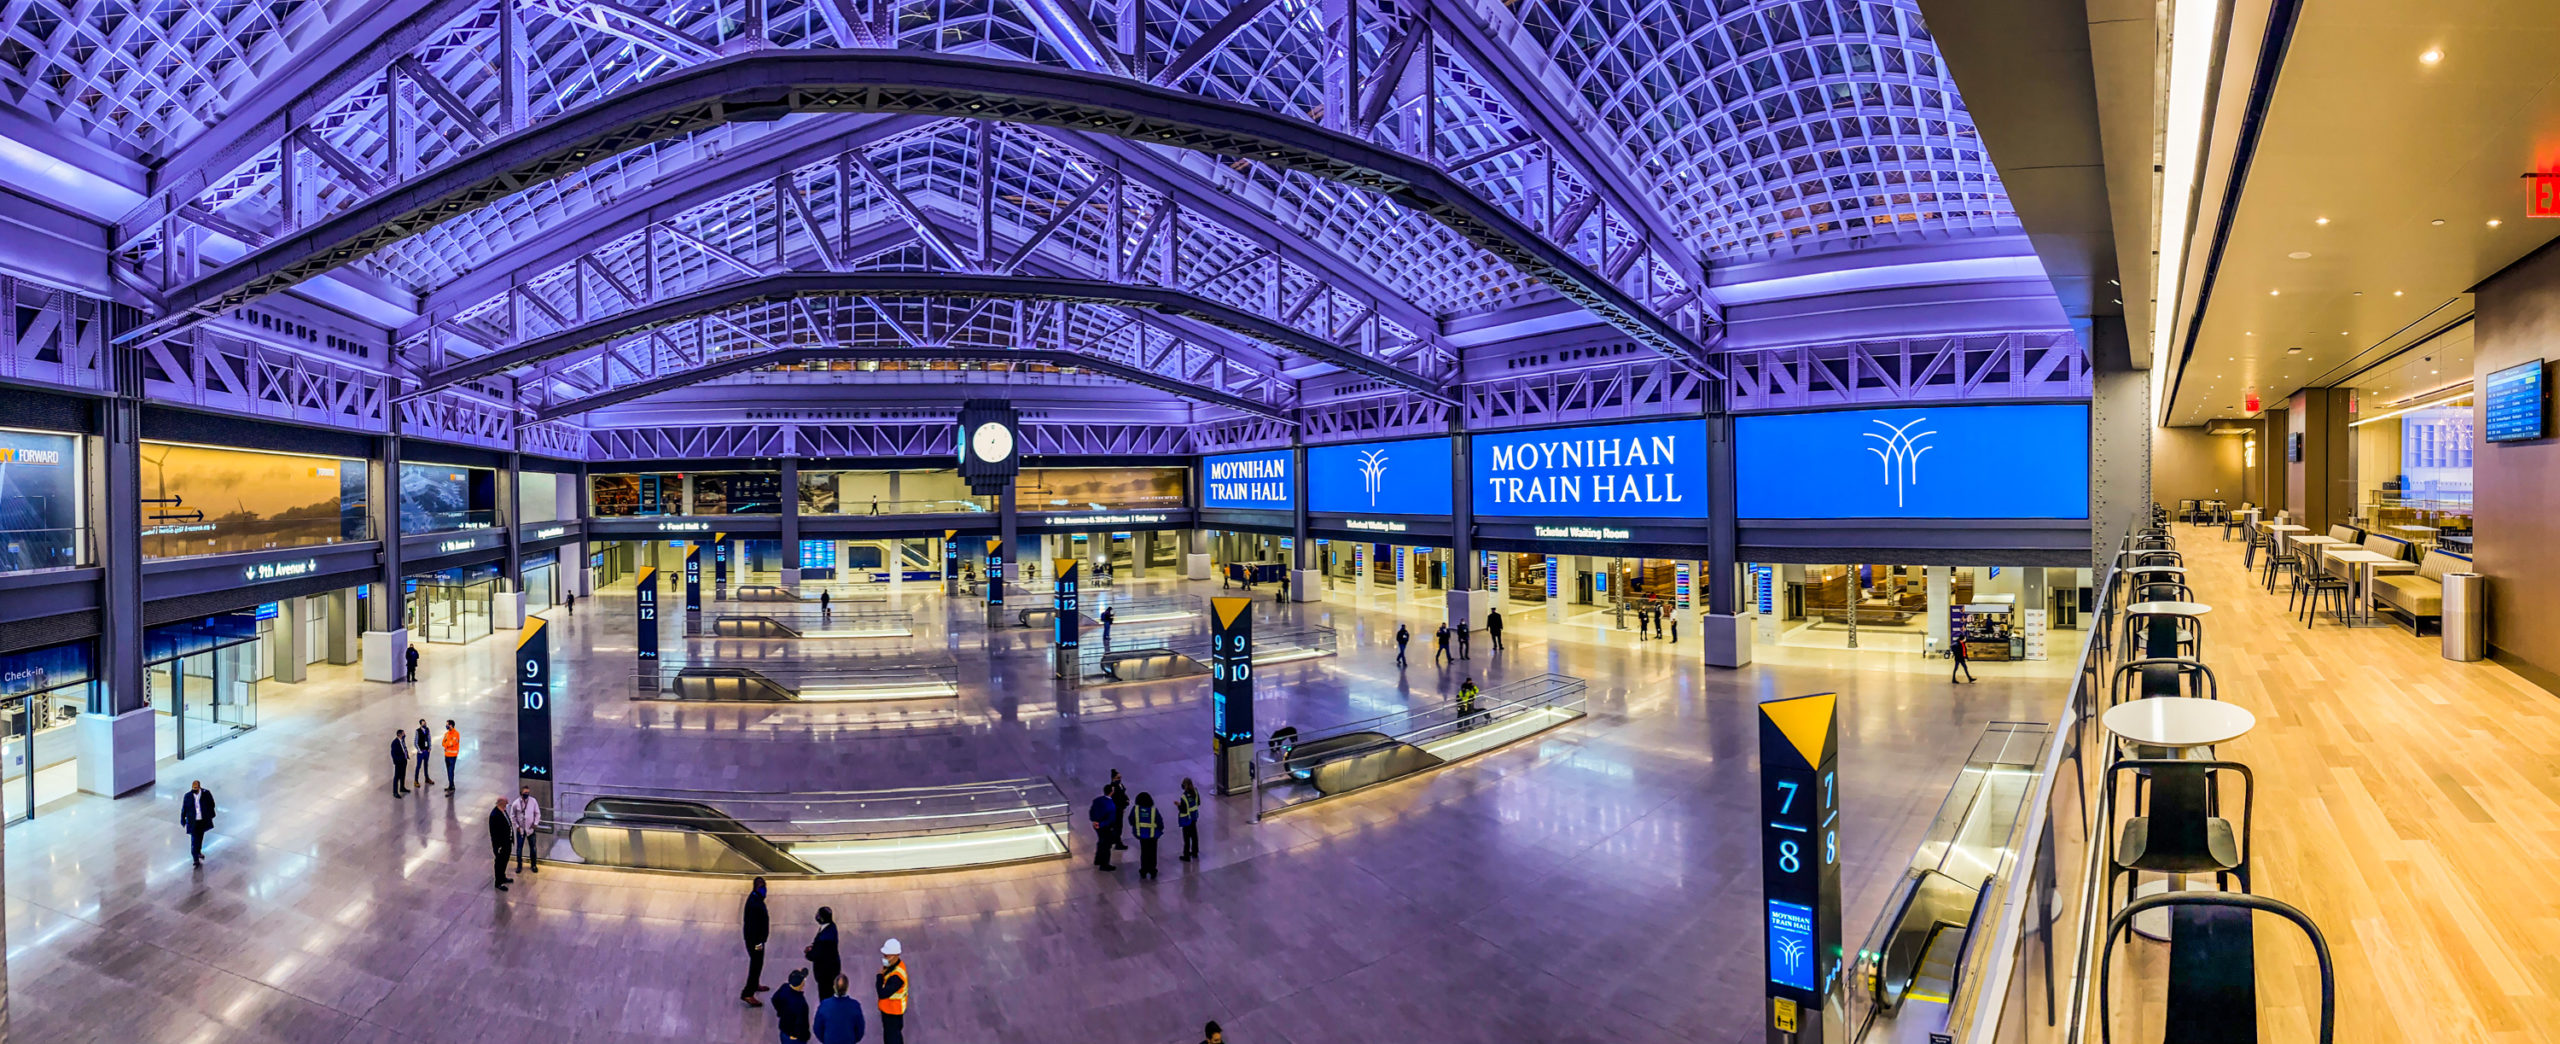 Travelers are greeted in the main hall of the Moynihan Train Hall by 1,700 square feet of direct view LED screens, separated into four distinct panels, that run along one side of the expansive room.